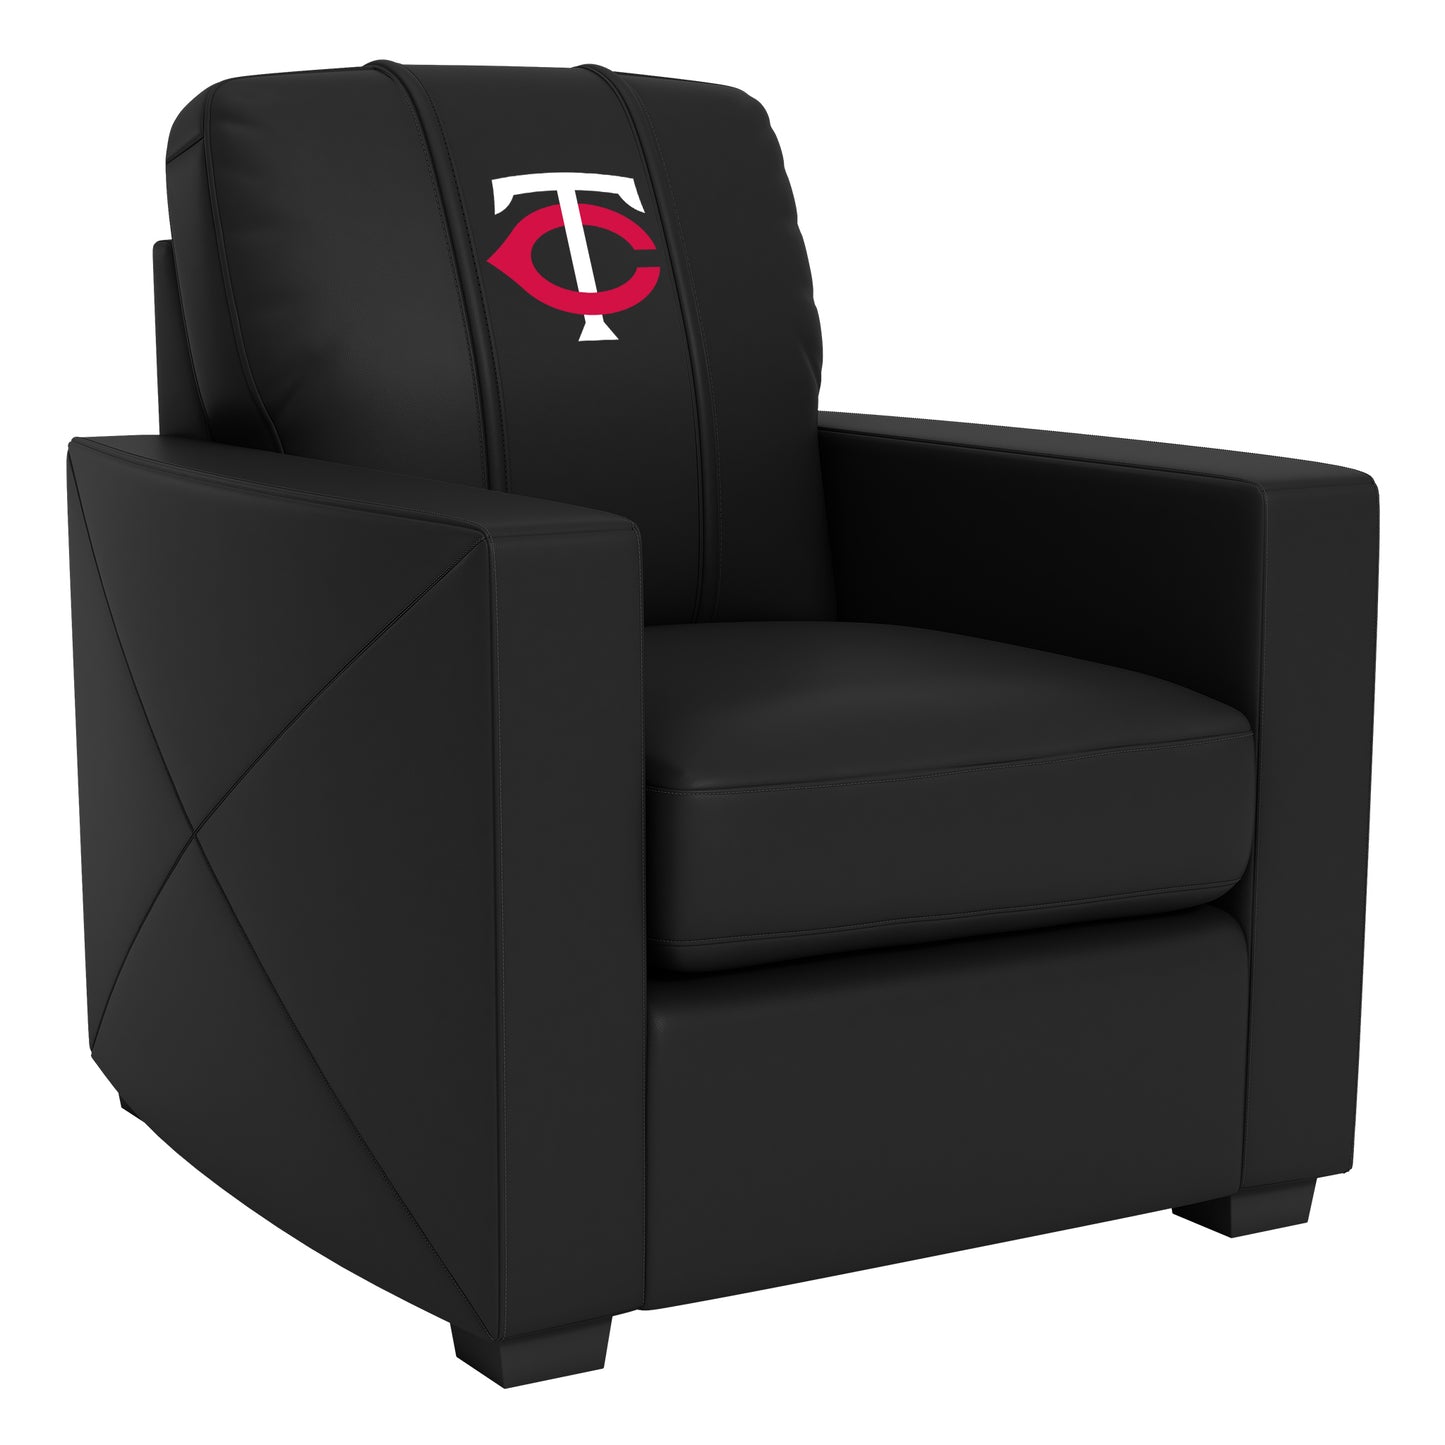 Silver Club Chair with Minnesota Twins Secondary